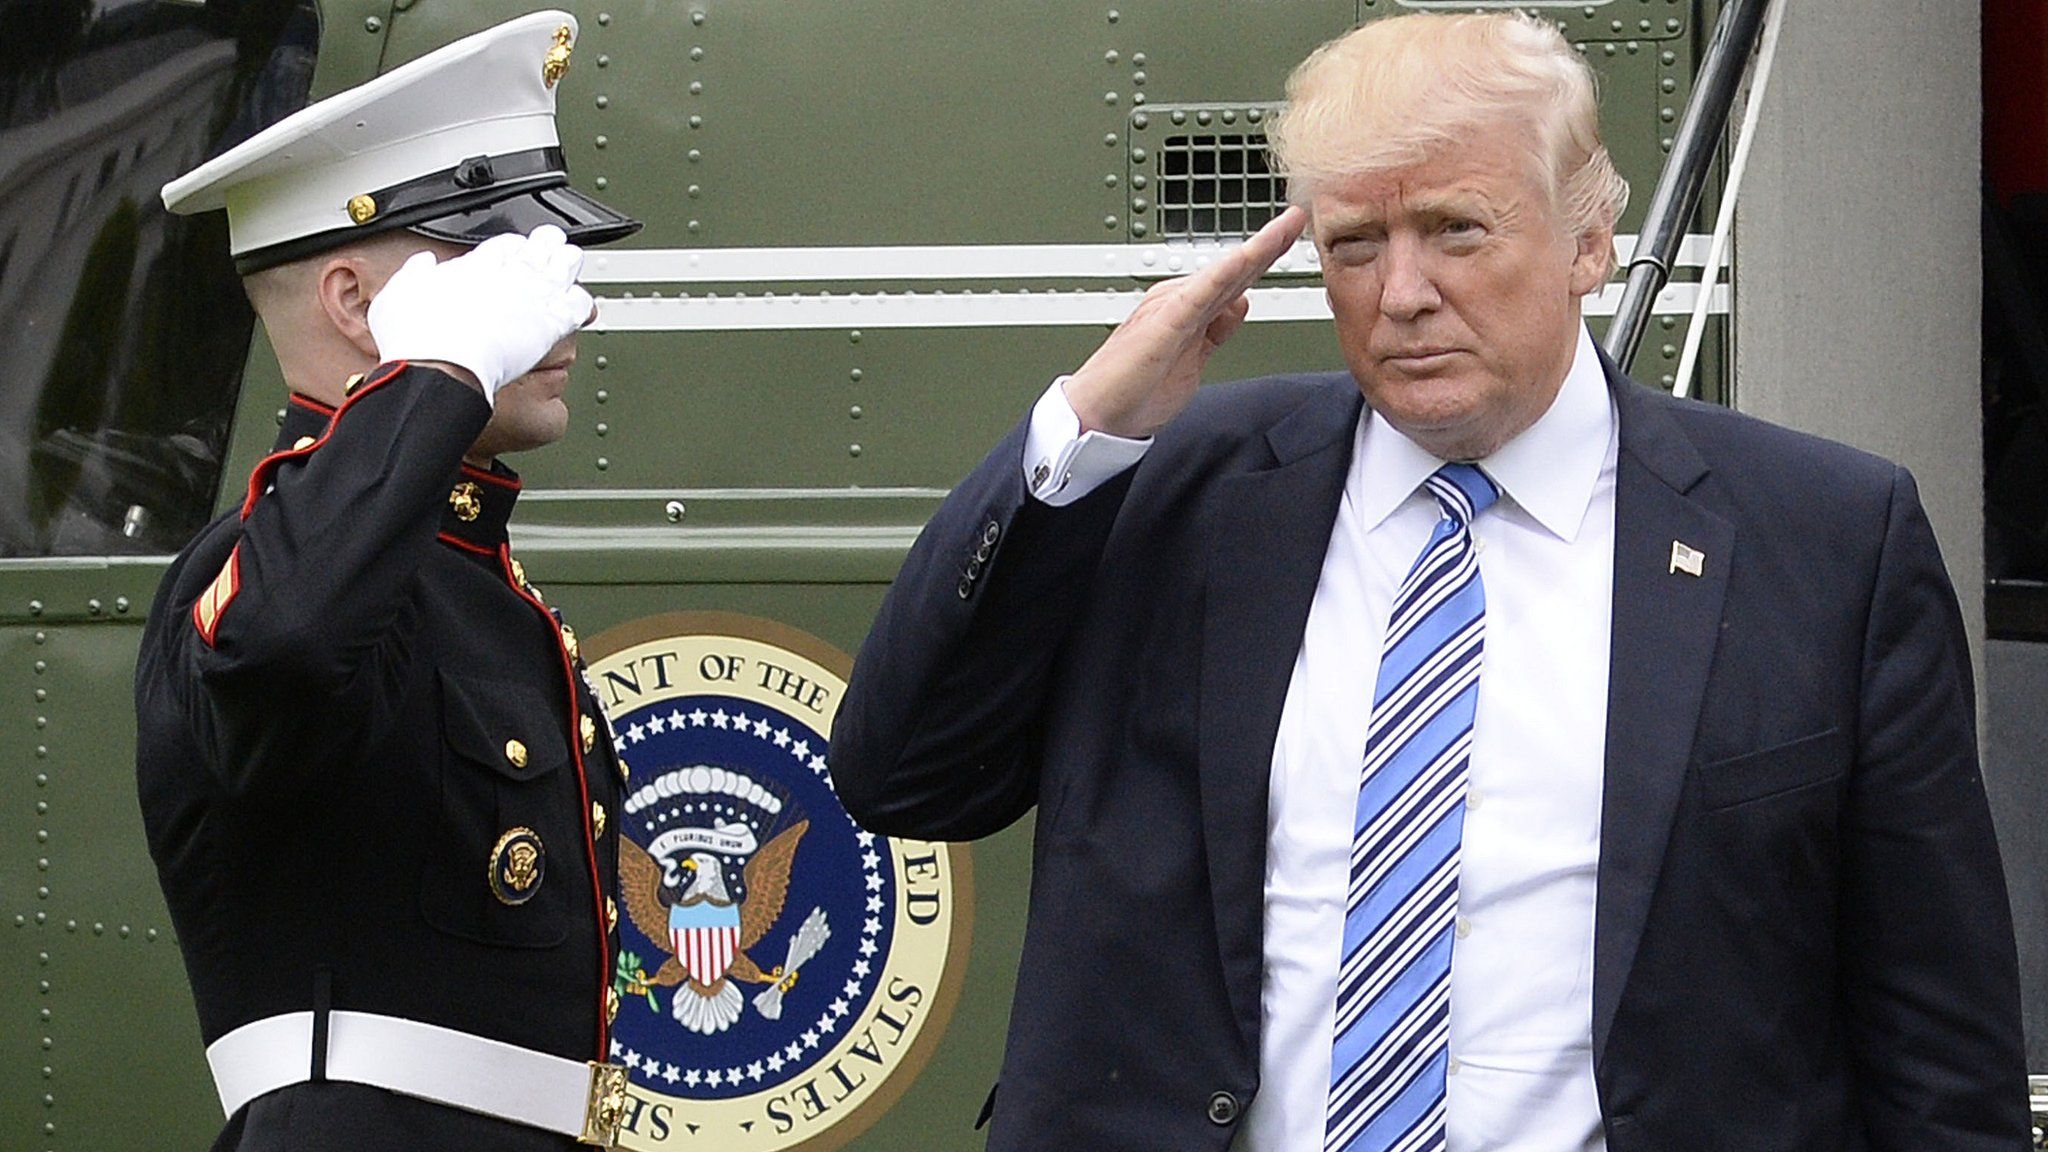 Donald Trump salutes the Marine Guard as he disembarks from Marine One at the White House. 13 May 2017